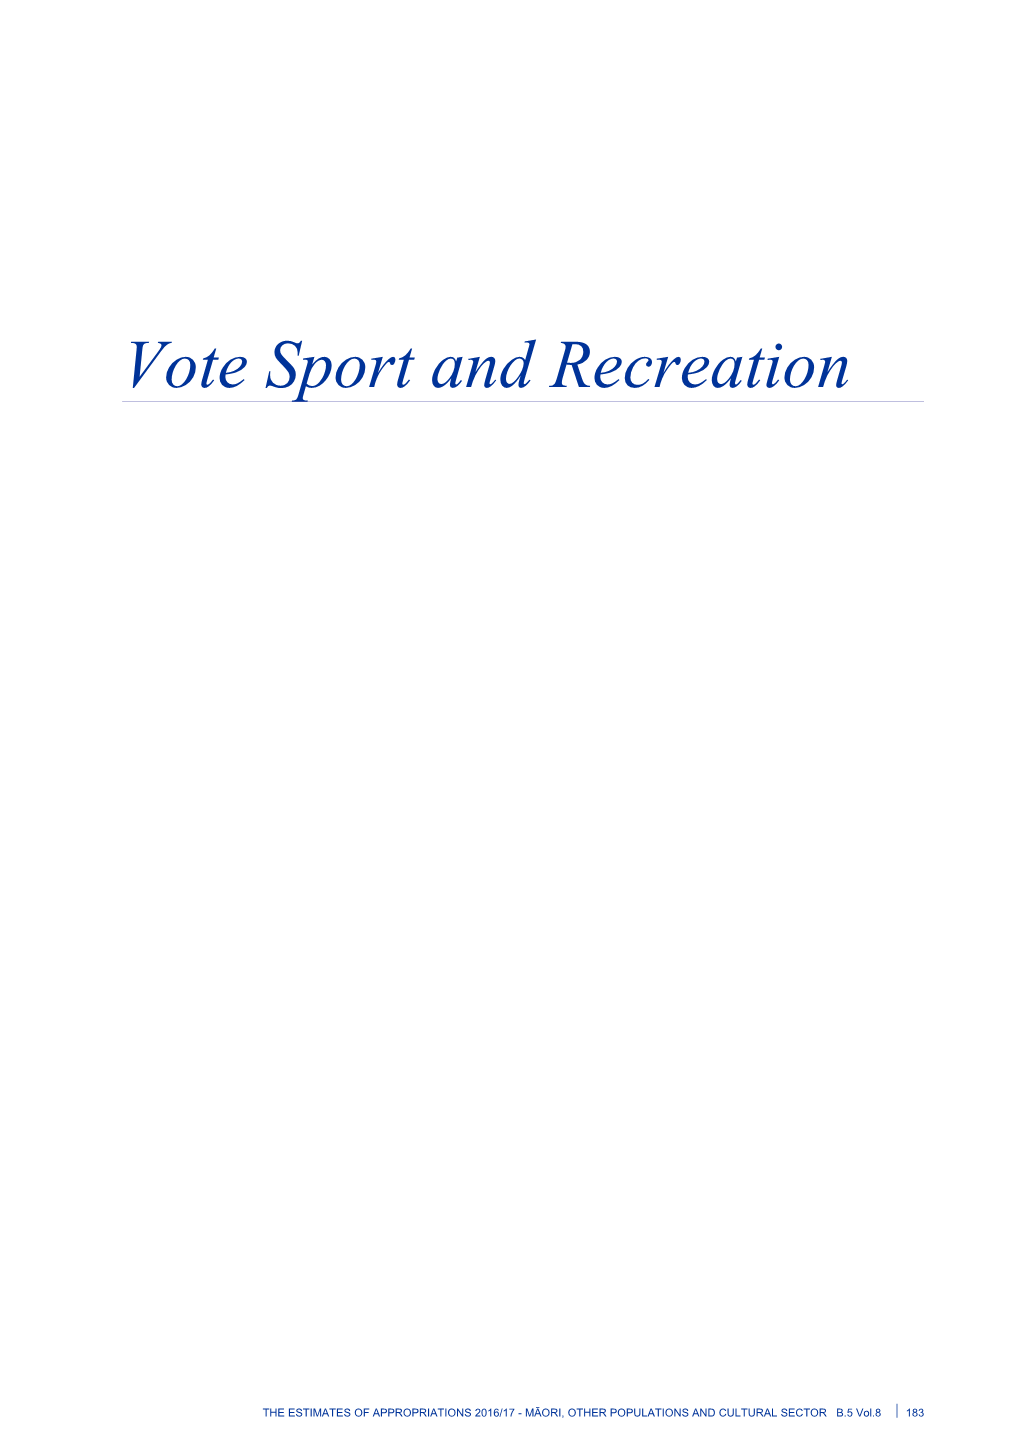 Vote Sport and Recreation - Vol 8 Māori, Other Populations and Cultural Sector - the Estimates